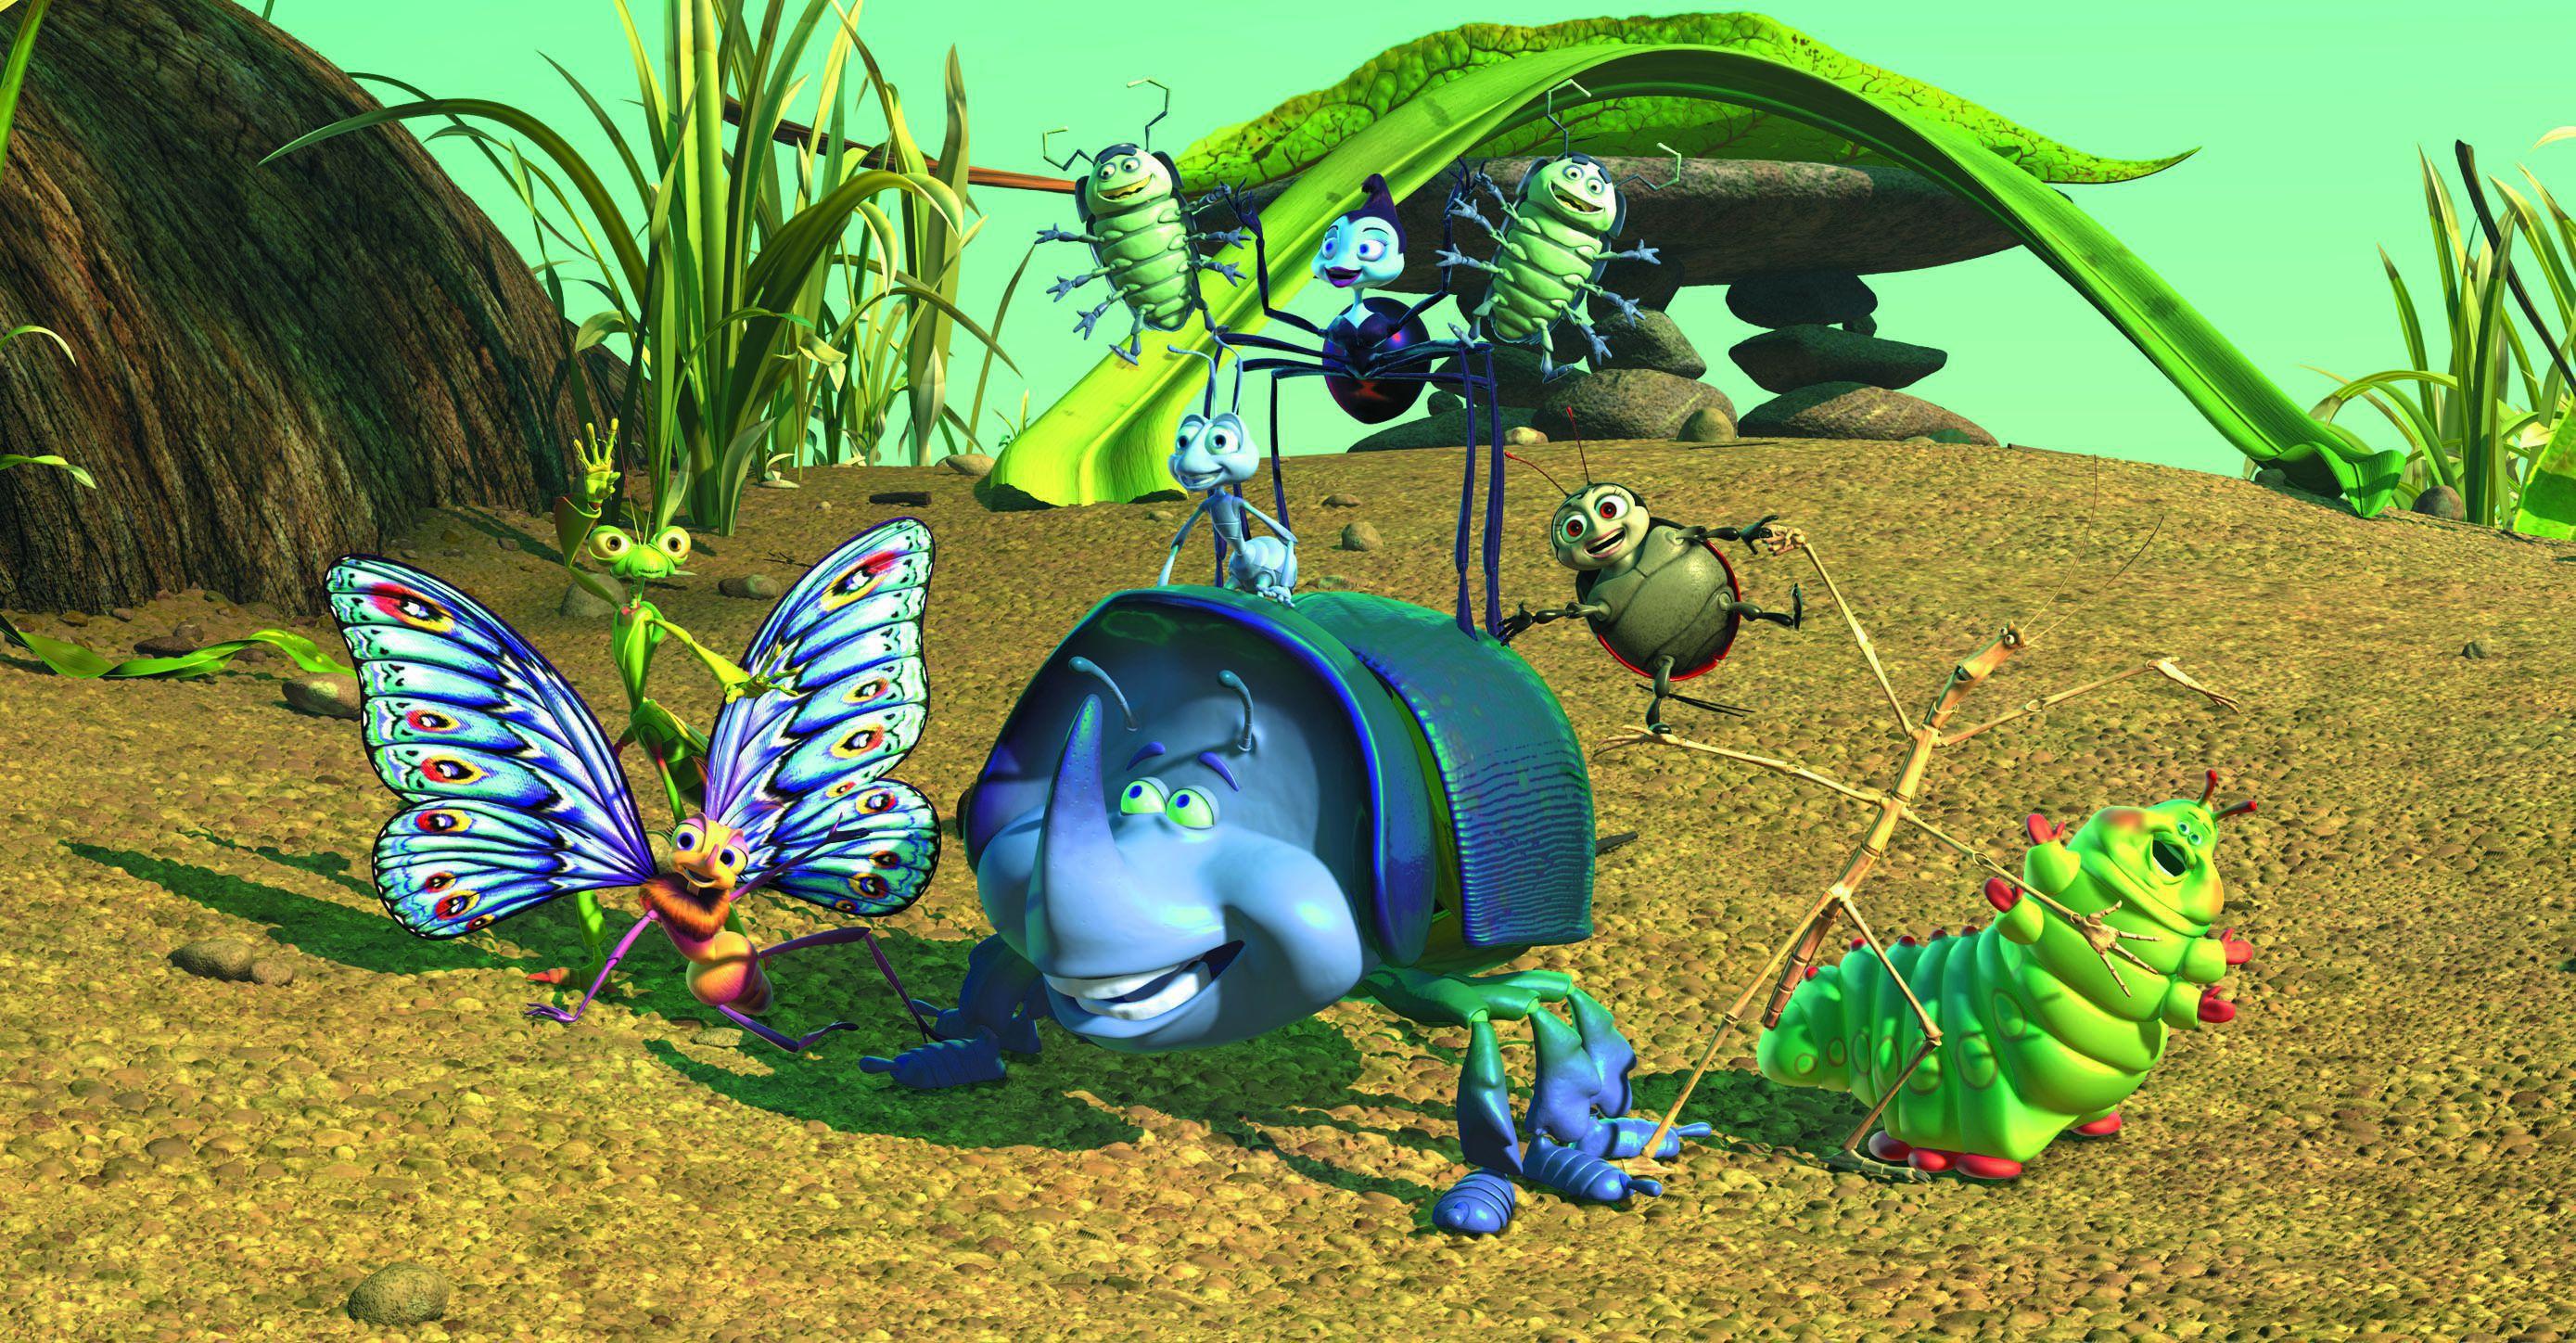 A Bug's Life Wallpaper and Background Image